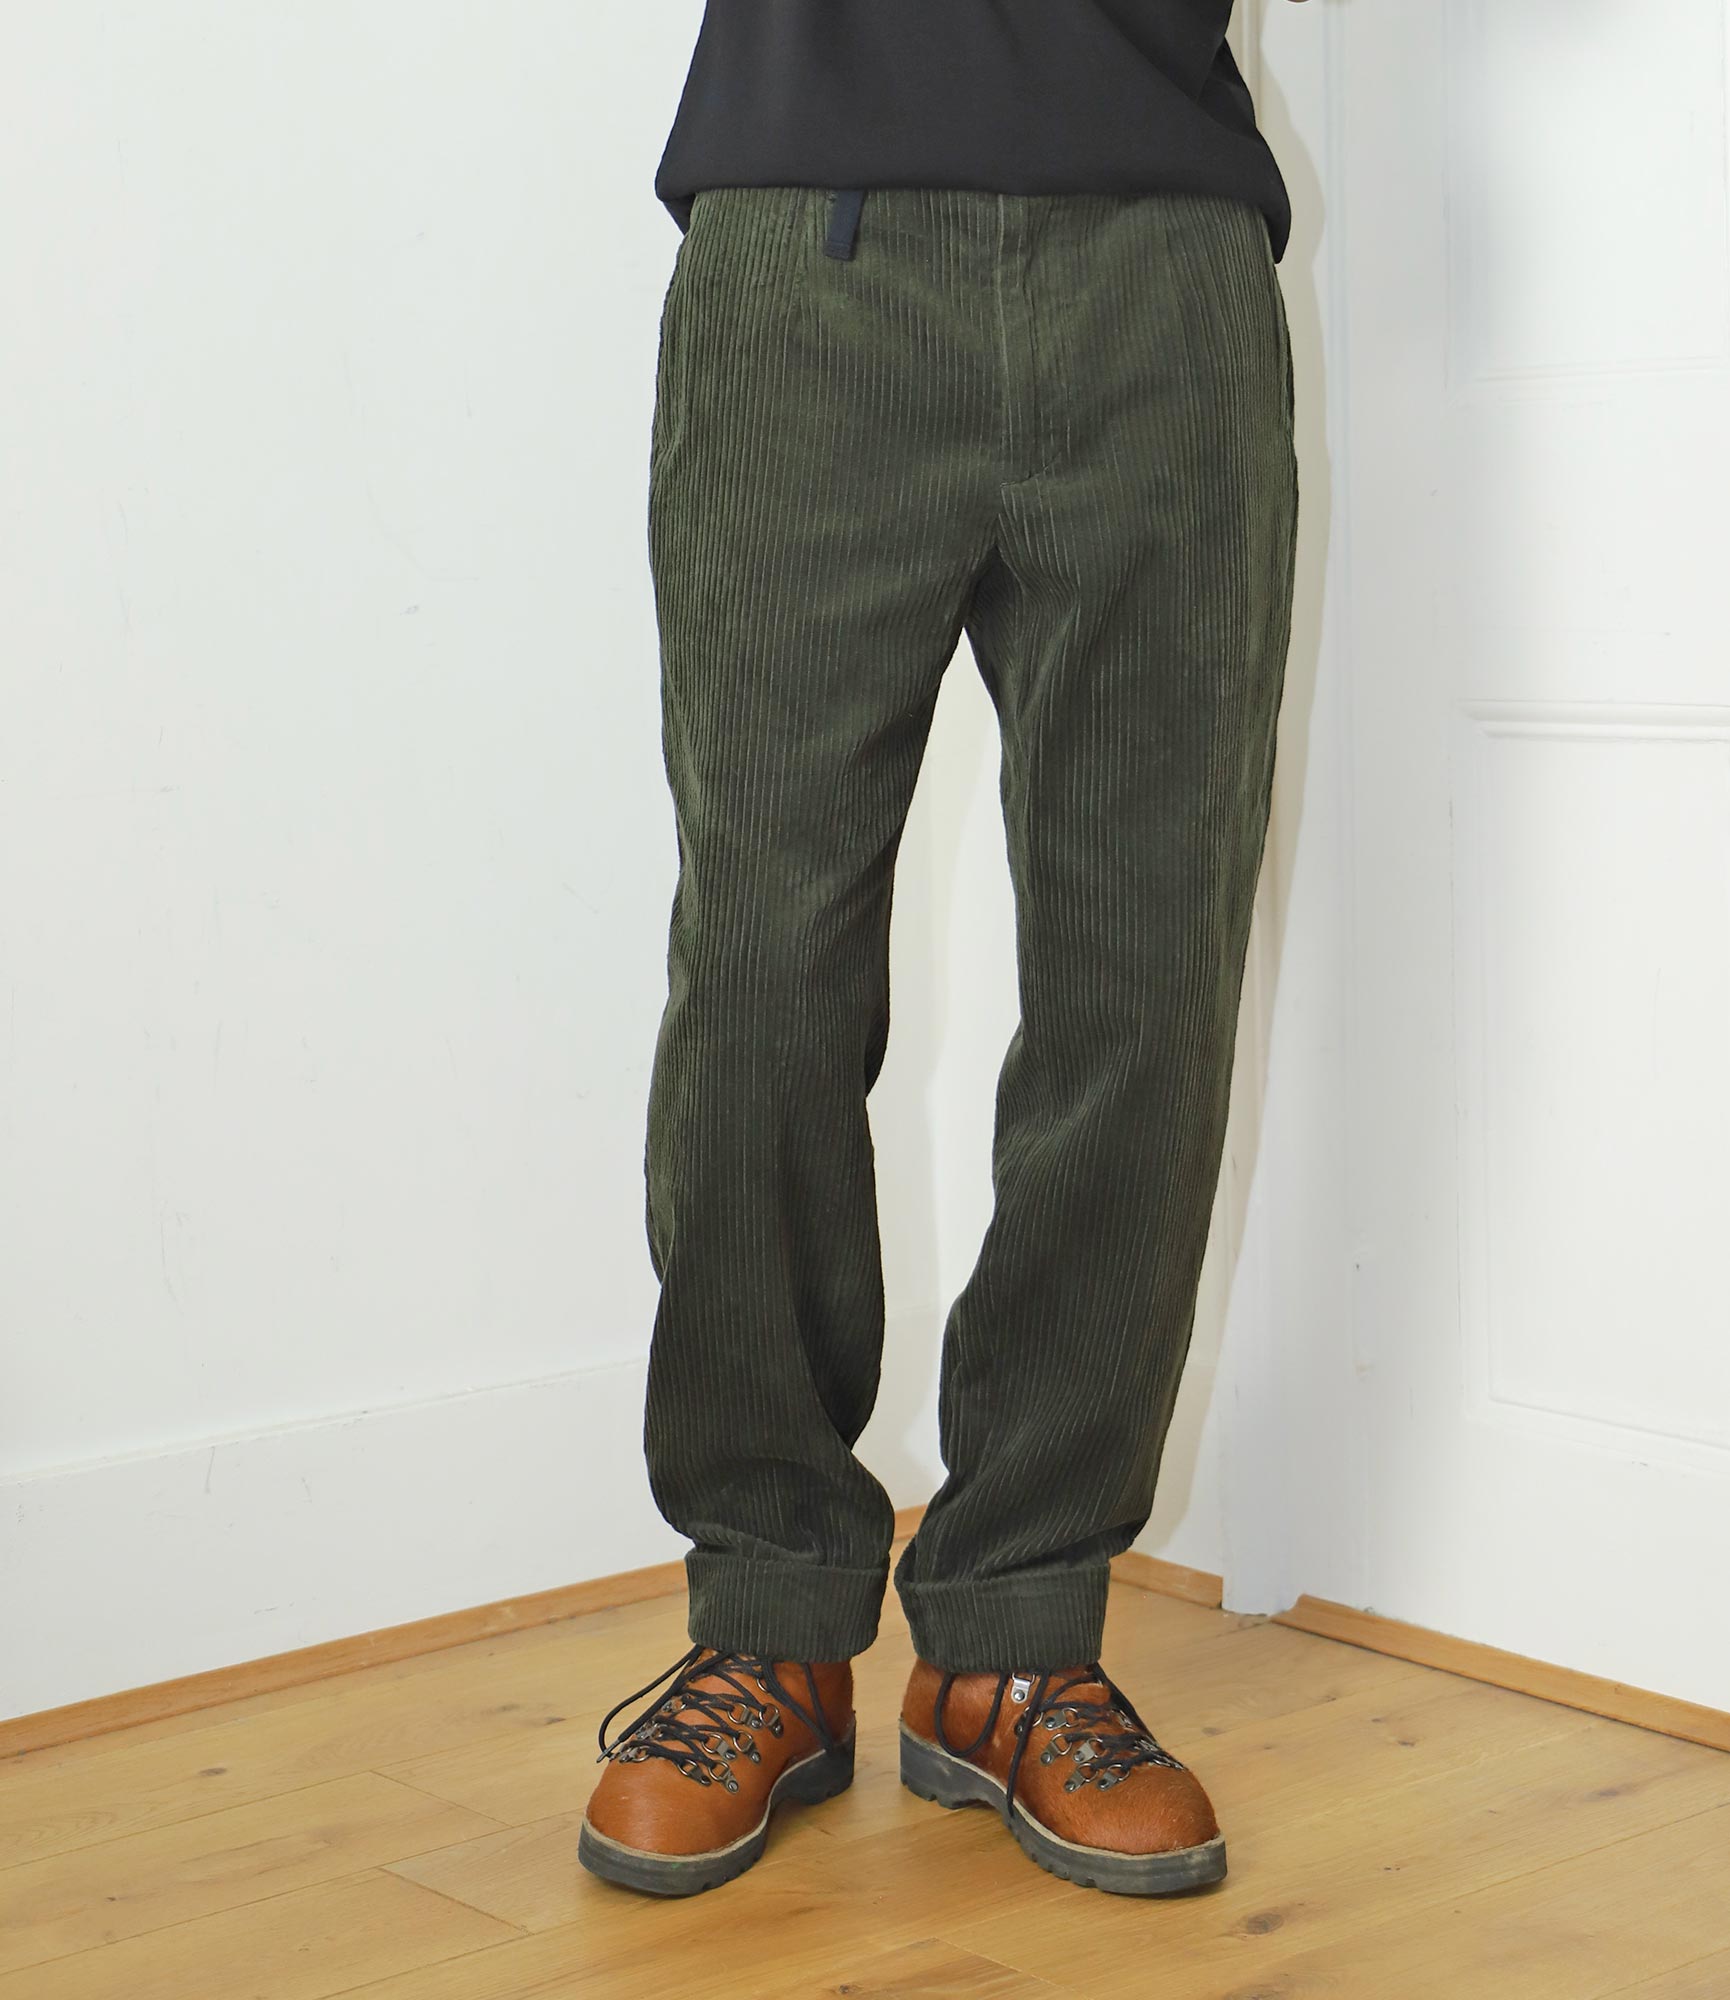 Engineered Garments Andover Pant - Olive Cotton 4.5W Corduroy